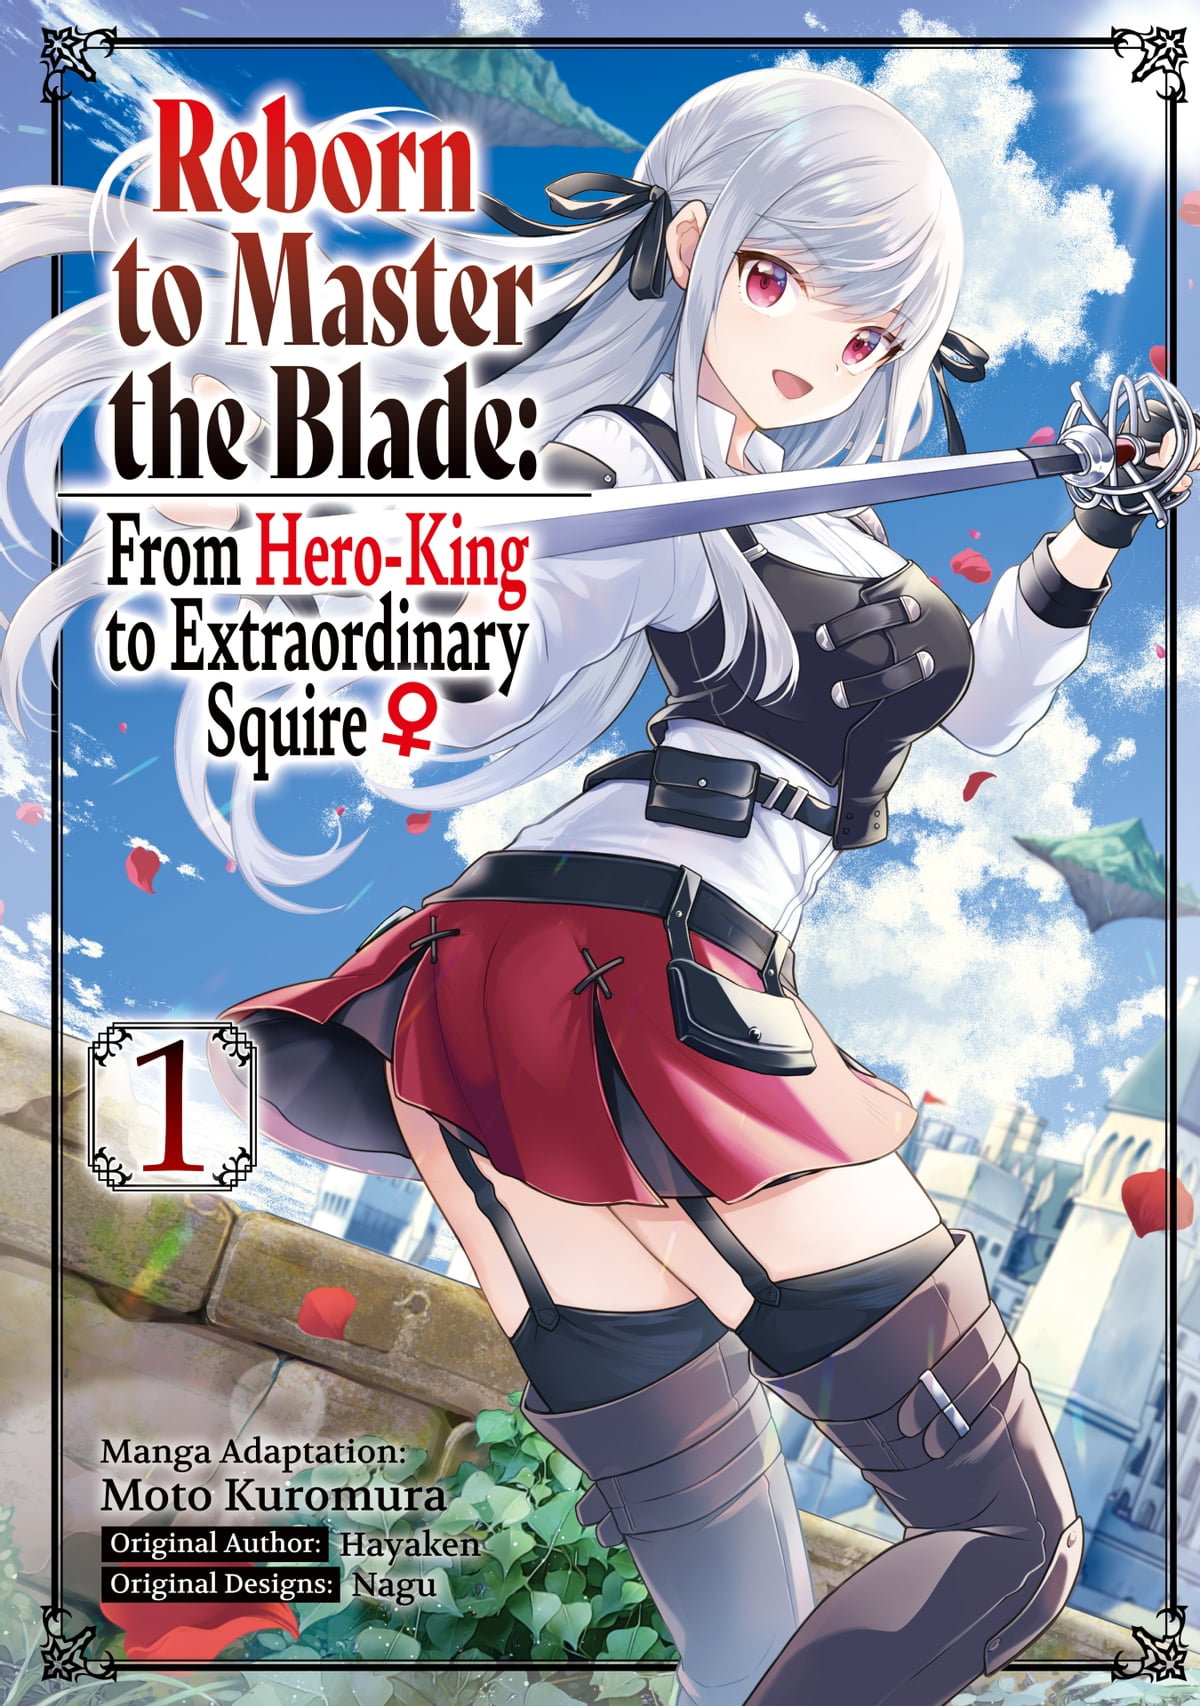 Find Everything About Reborn to Master the Blade: From Hero-King to  Extraordinary Slime Along With Main Plot, Characters and Their Casts - Anime  Superior